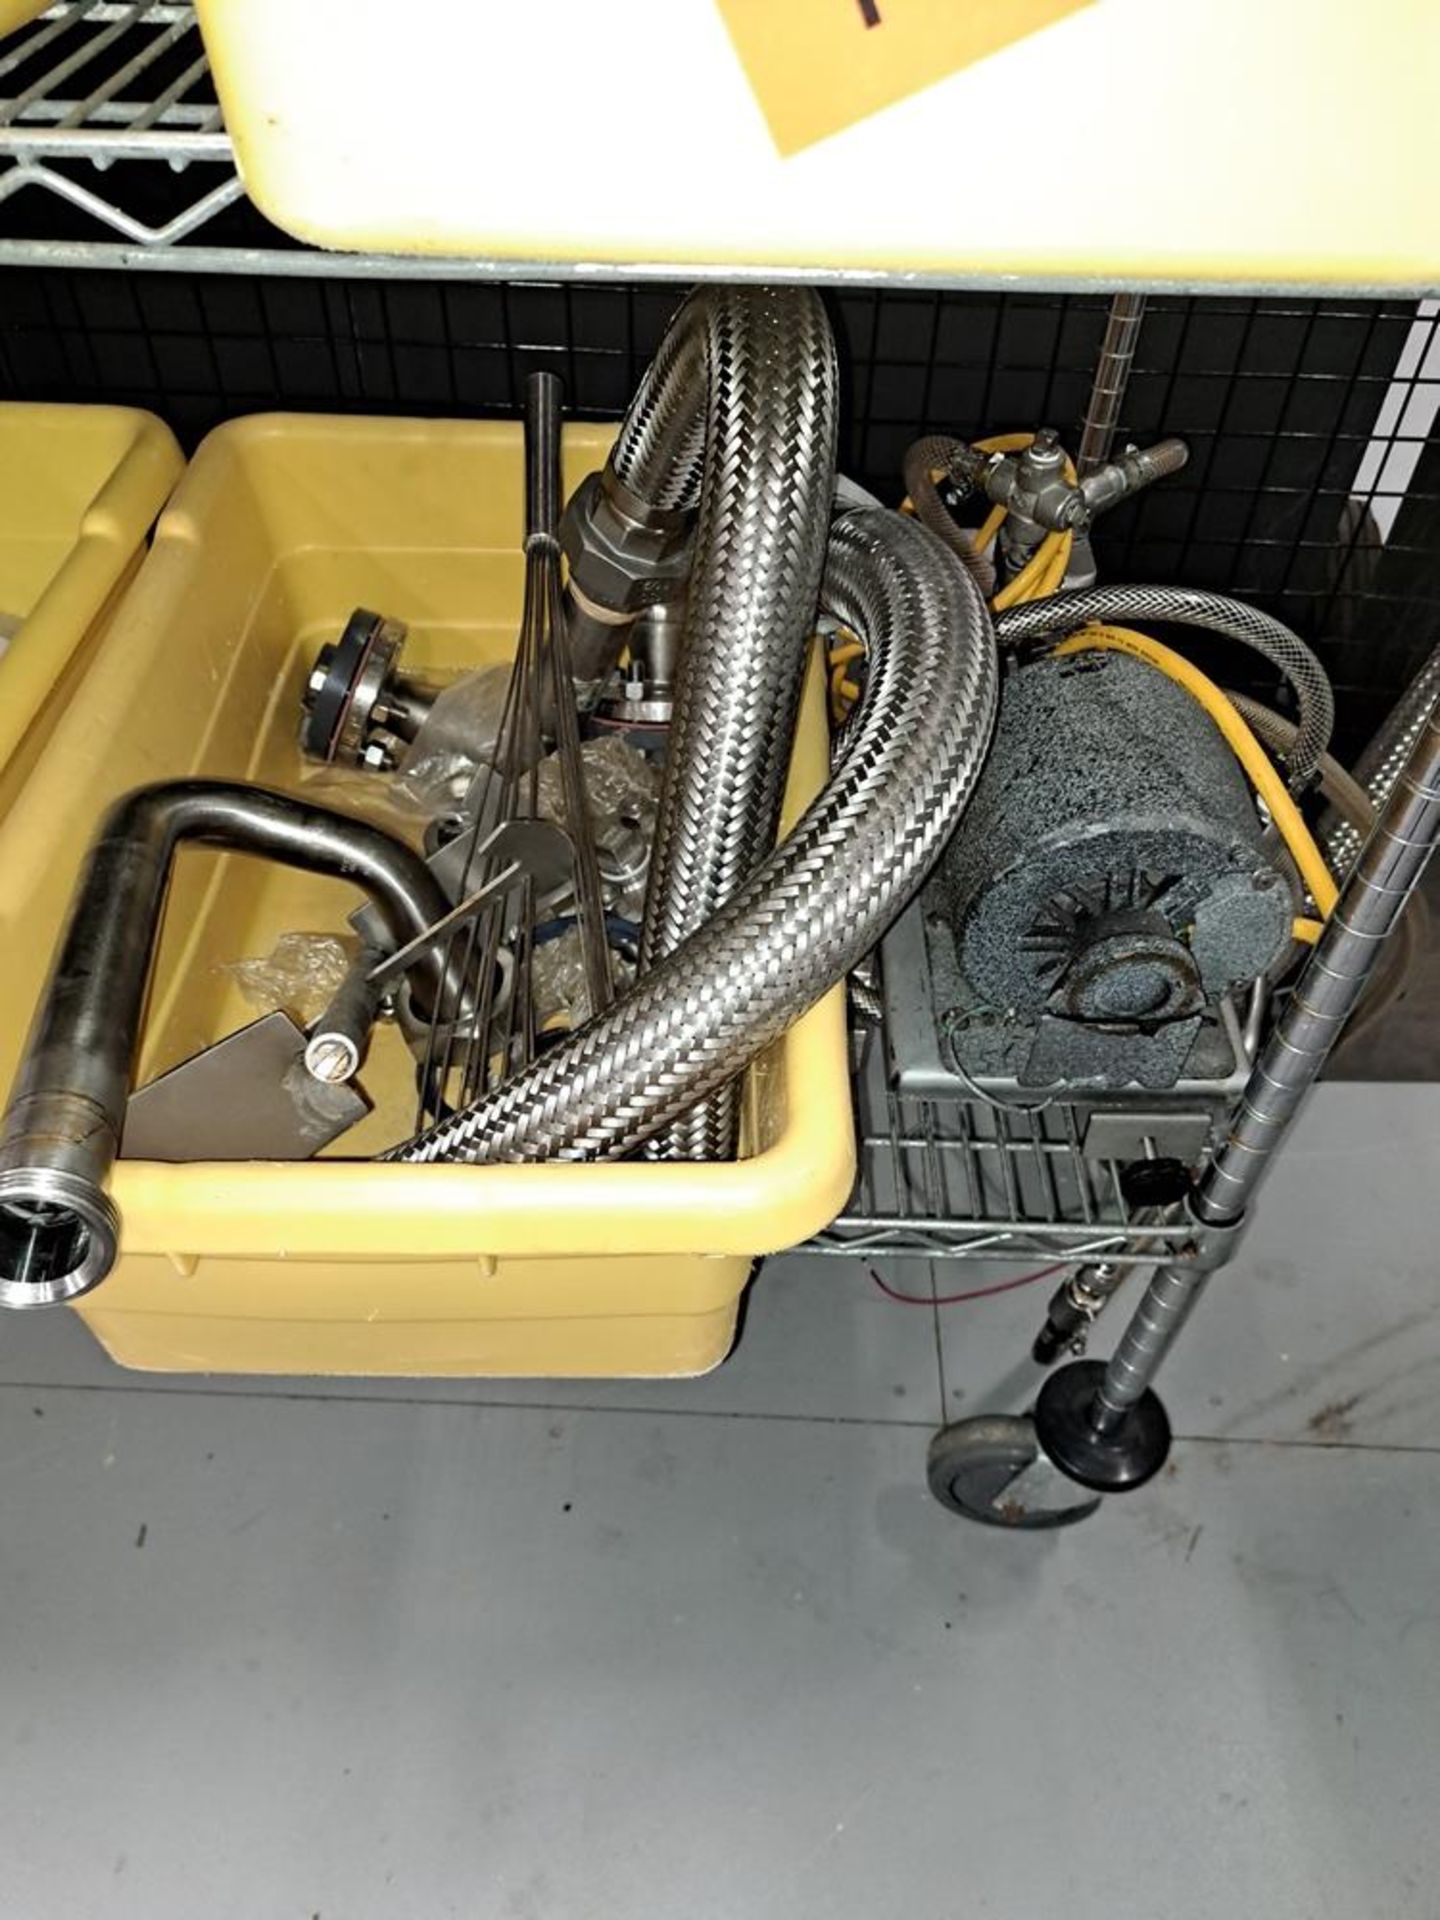 Lot Metro Rack, 24" W X 4' L X 65" T with contents: hoses, piping, etc. -Removal Is By Appointment - Image 2 of 5